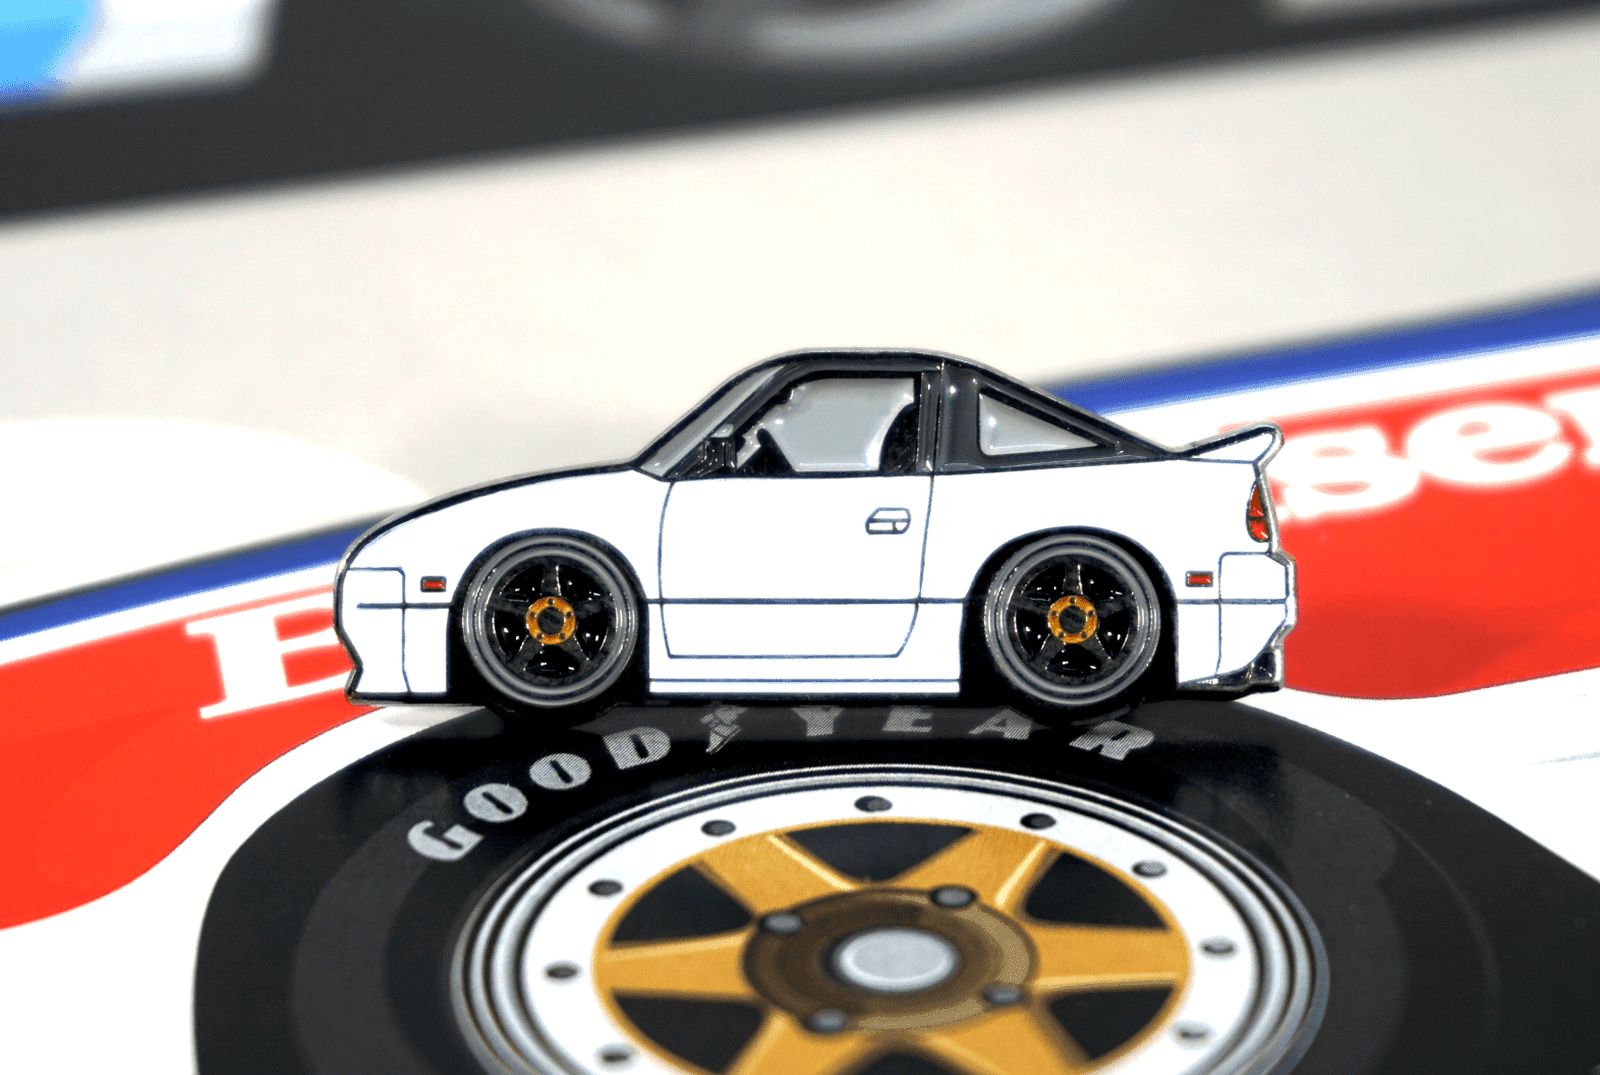 ZSPEC S-Chassis 240SX Tribute Lapel / Hat Pin Gift Holiday Man Cave Garage Art Men Man Woman Car Nut Enthusiast